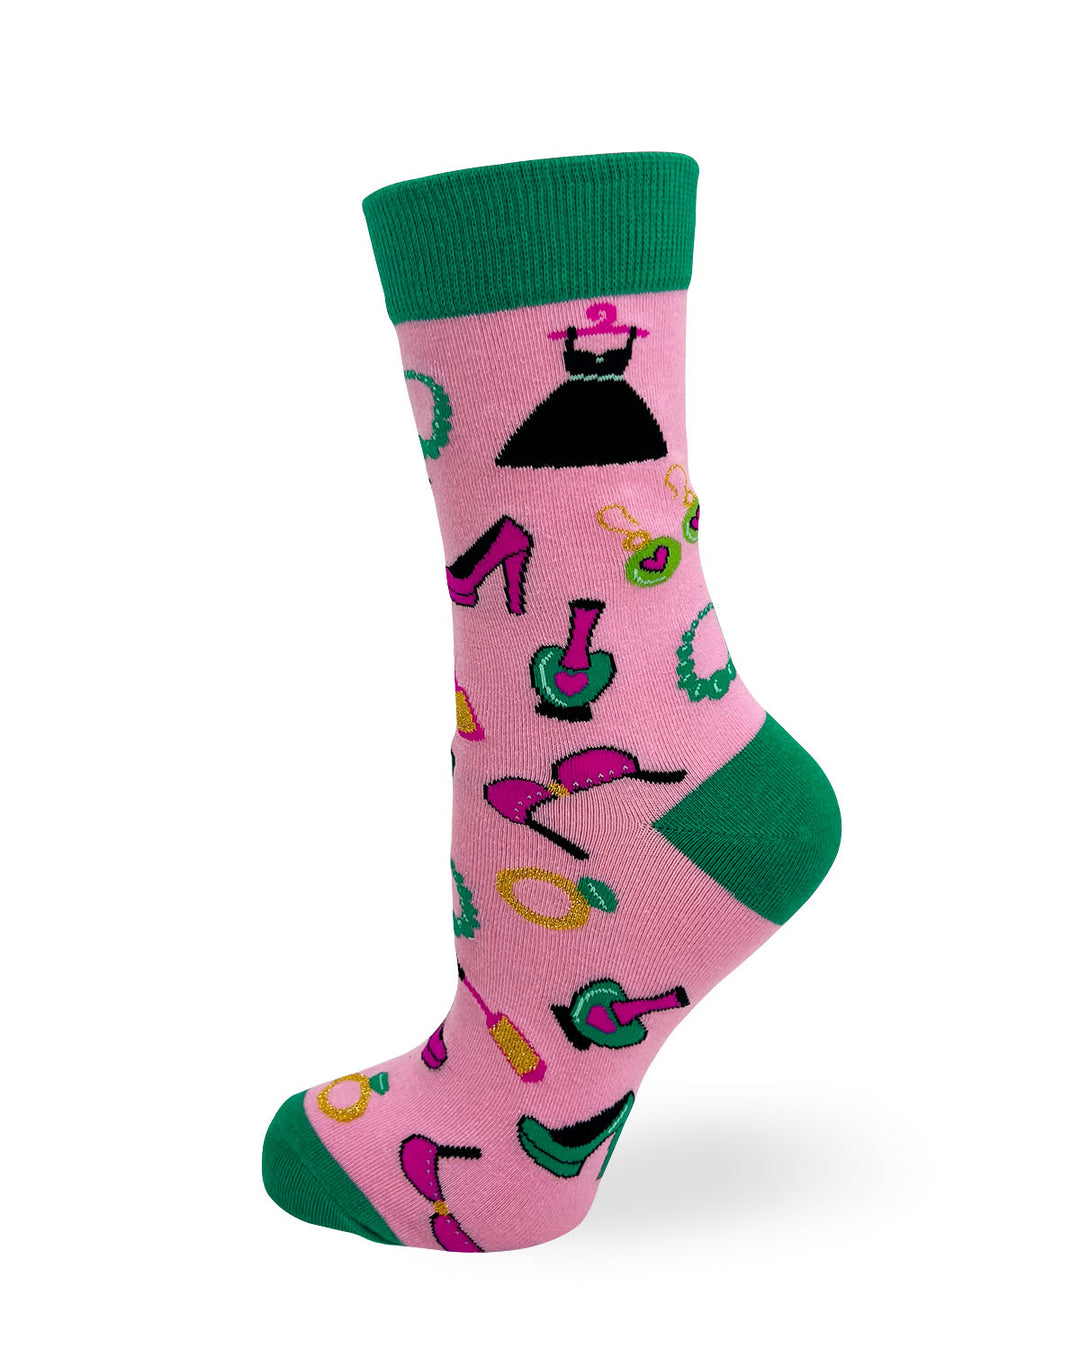 Pink and green novelty socks for women